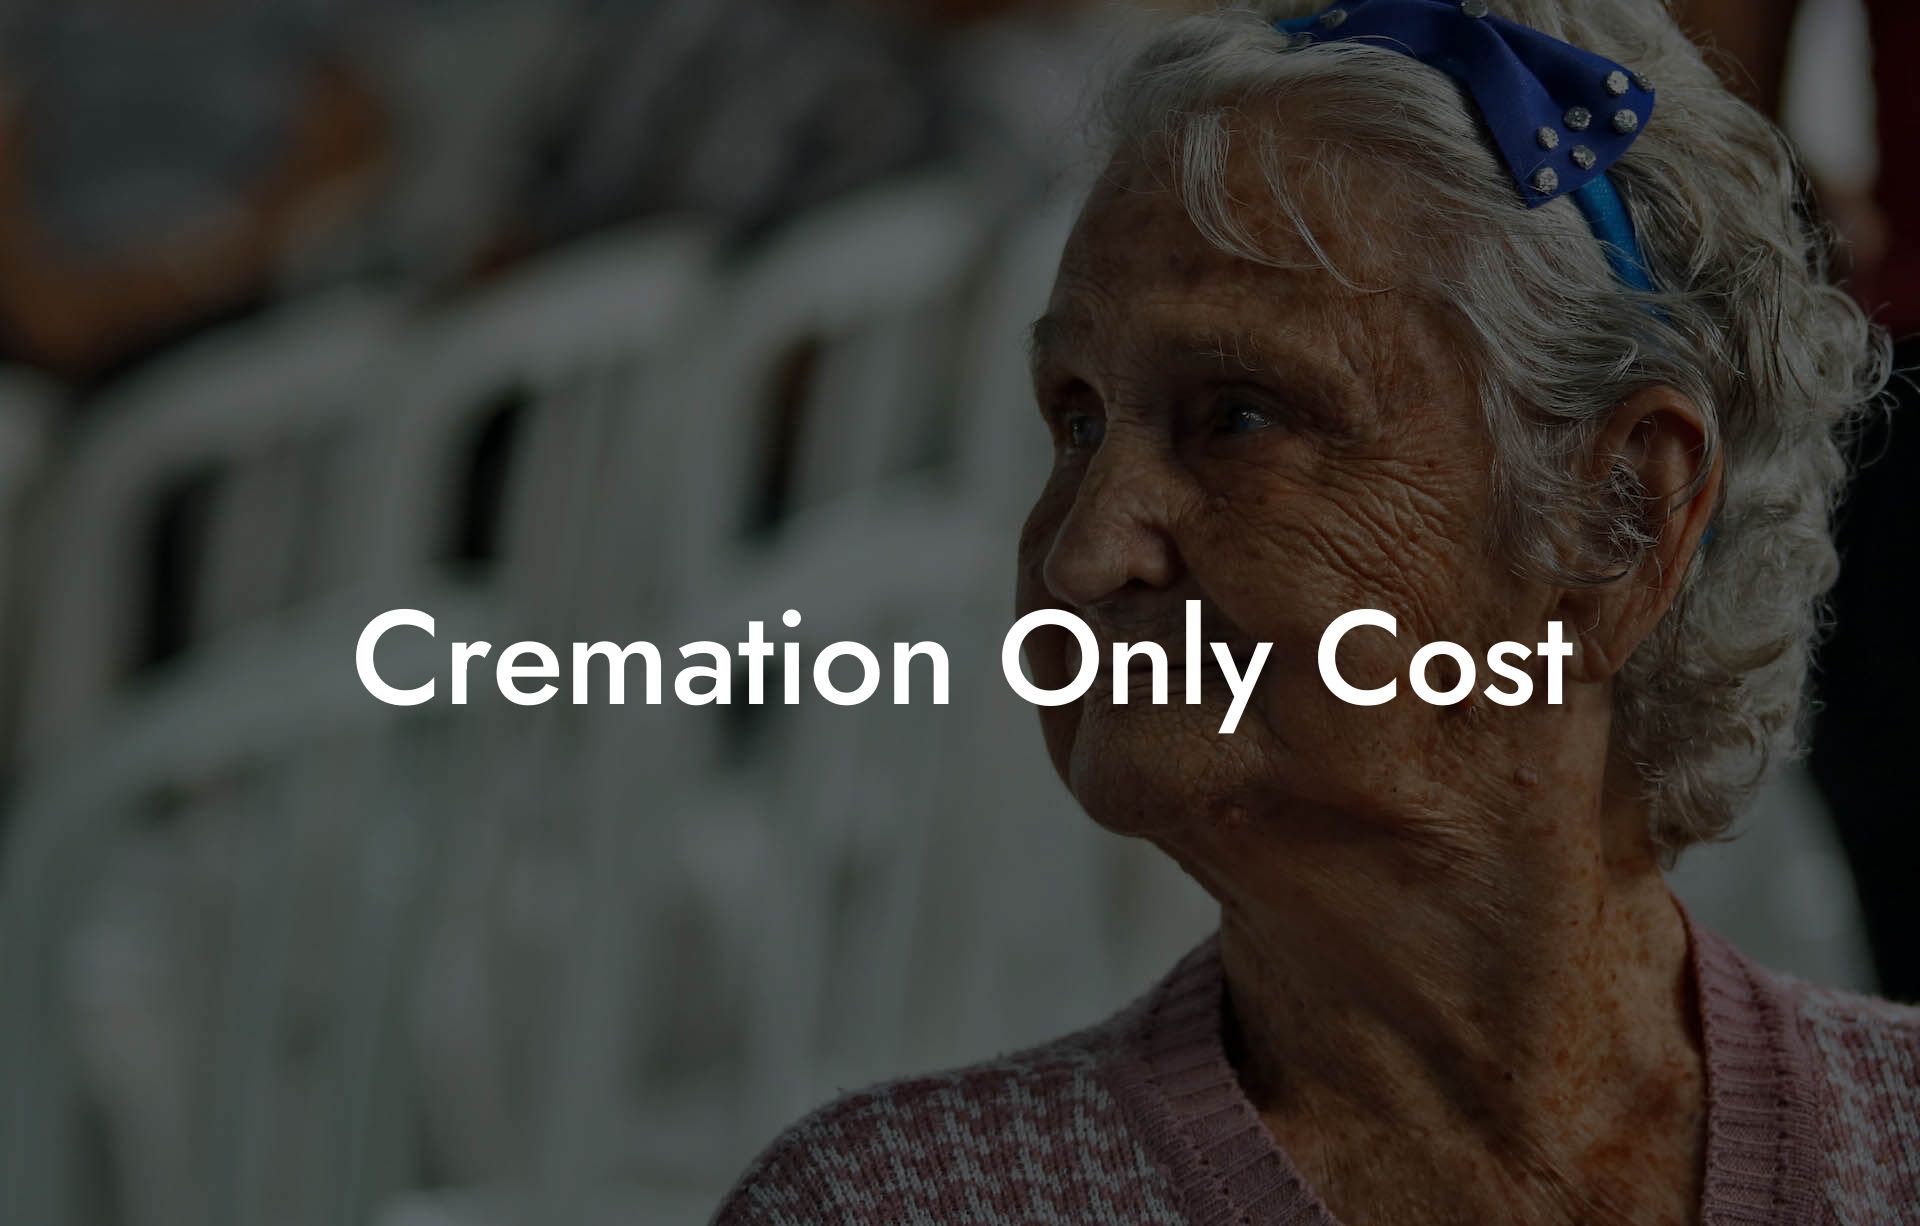 Cremation Only Cost